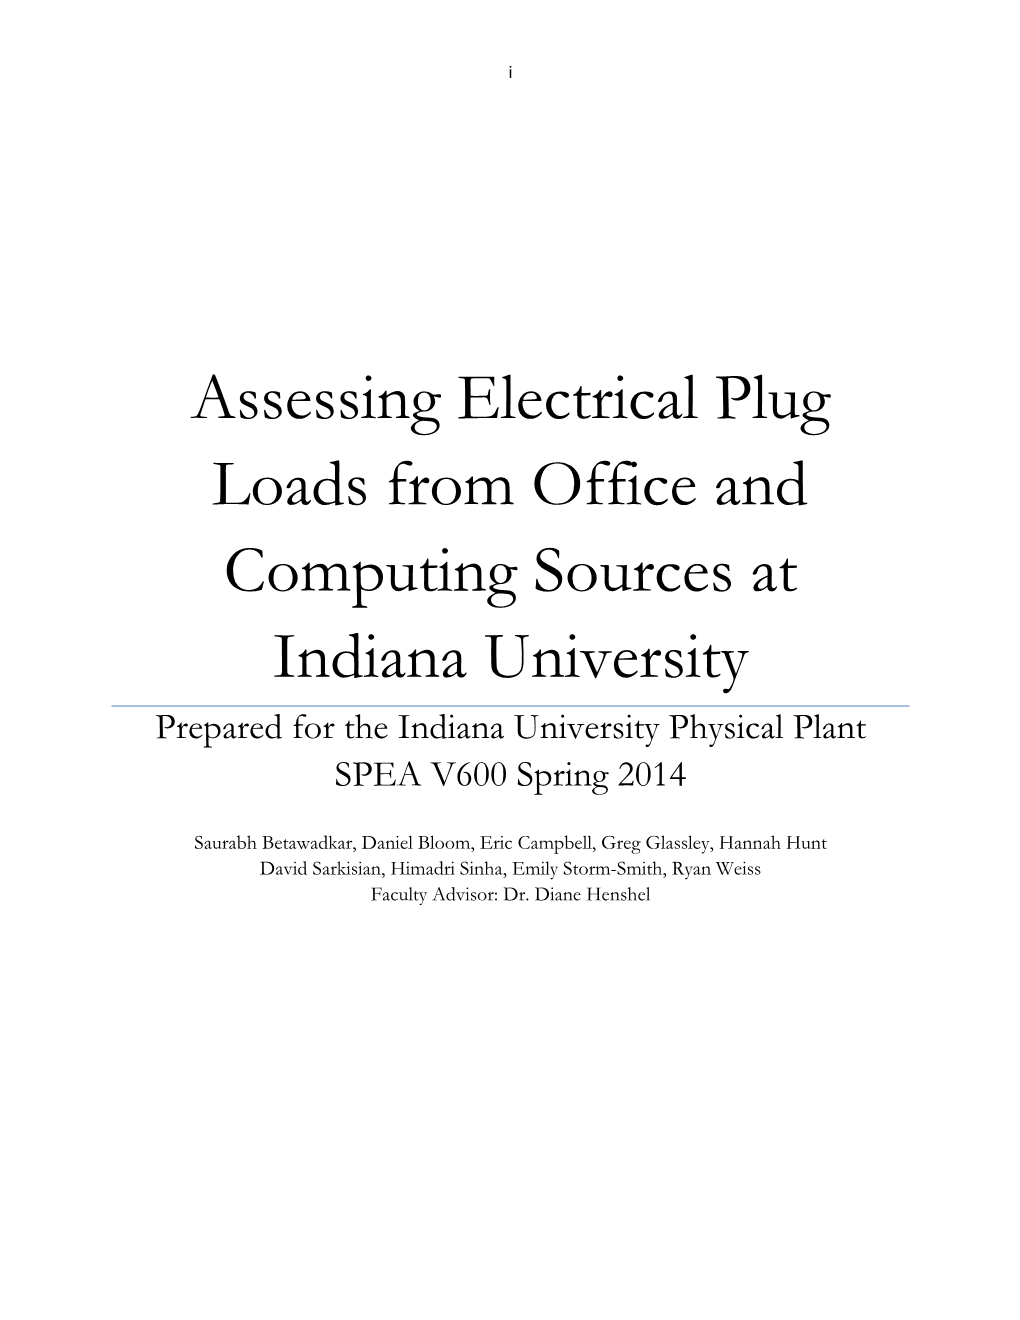 Assessing Electrical Plug Loads from Office and Computing Sources at Indiana University Prepared for the Indiana University Physical Plant SPEA V600 Spring 2014